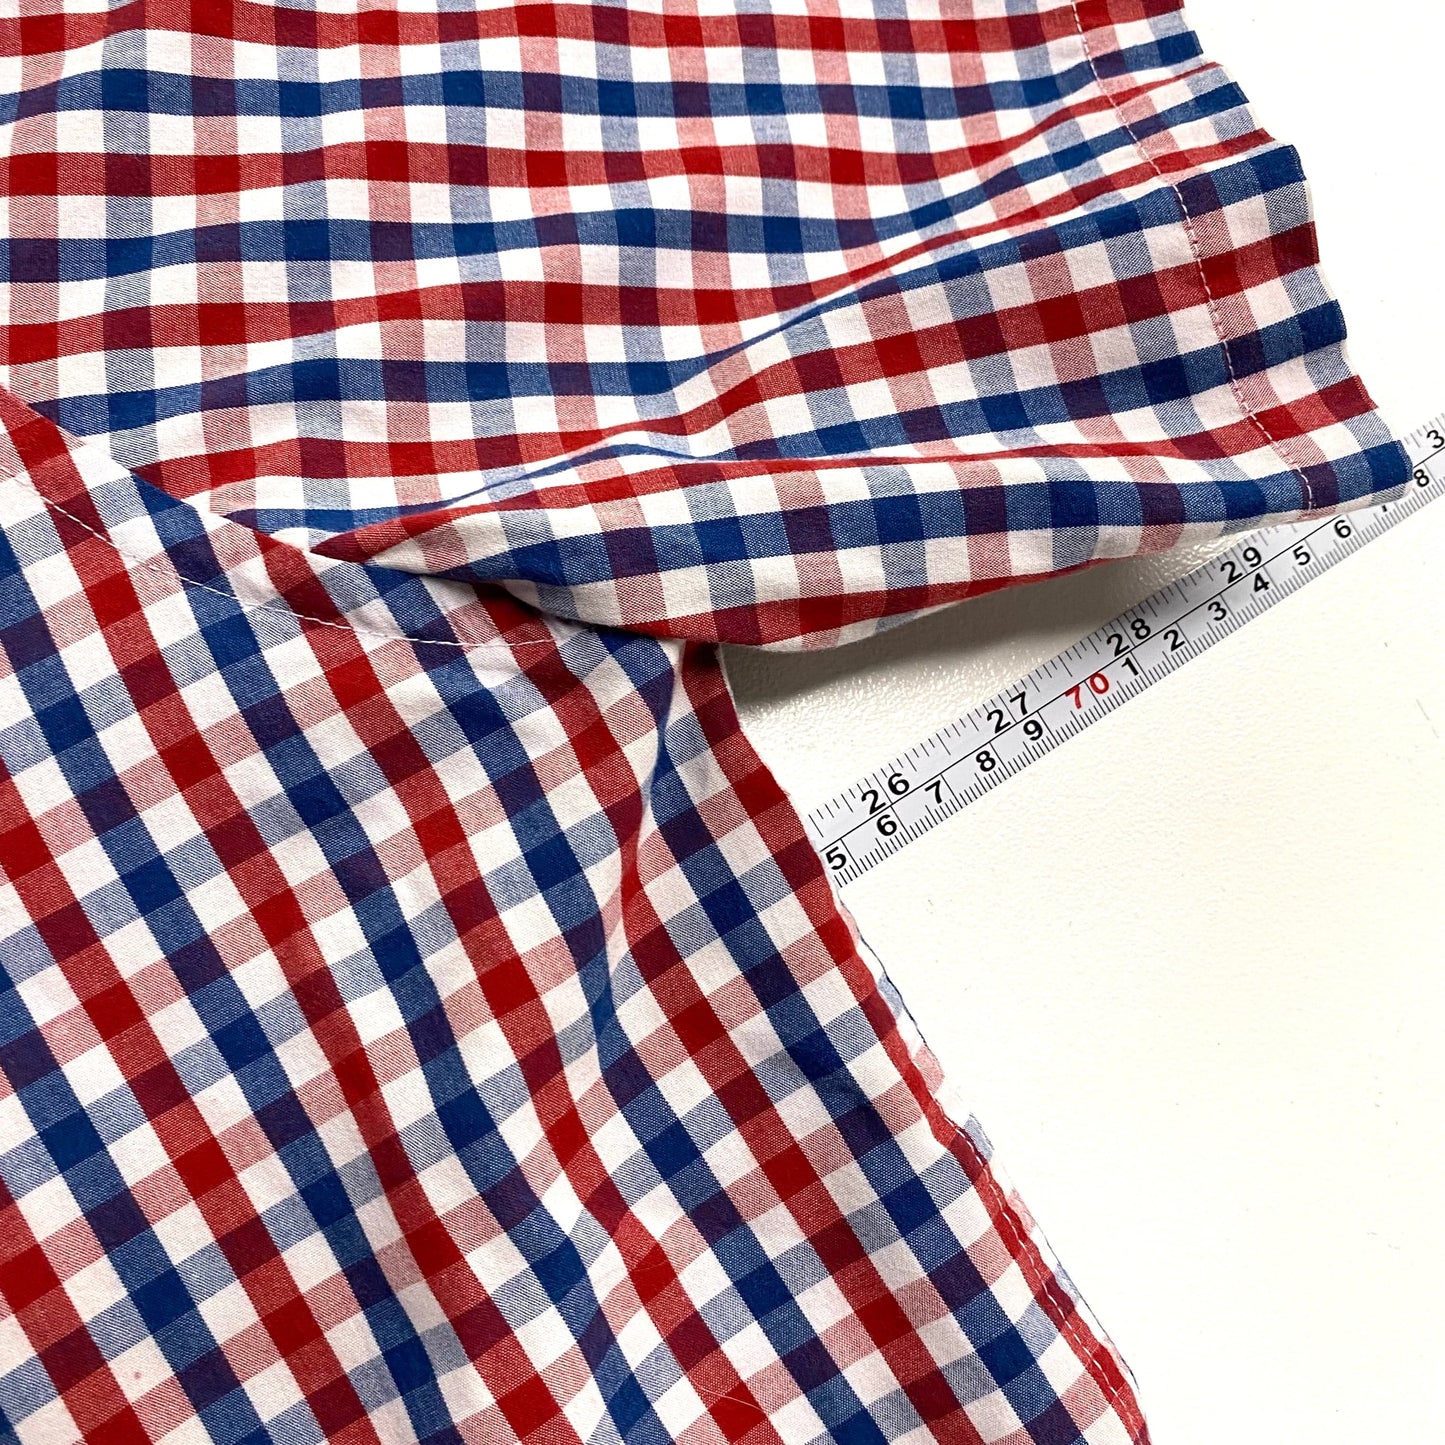 Dockers Mens Size XL Red/White/Blue Check Casual Button-Up Shirt S/s Pre-Owned